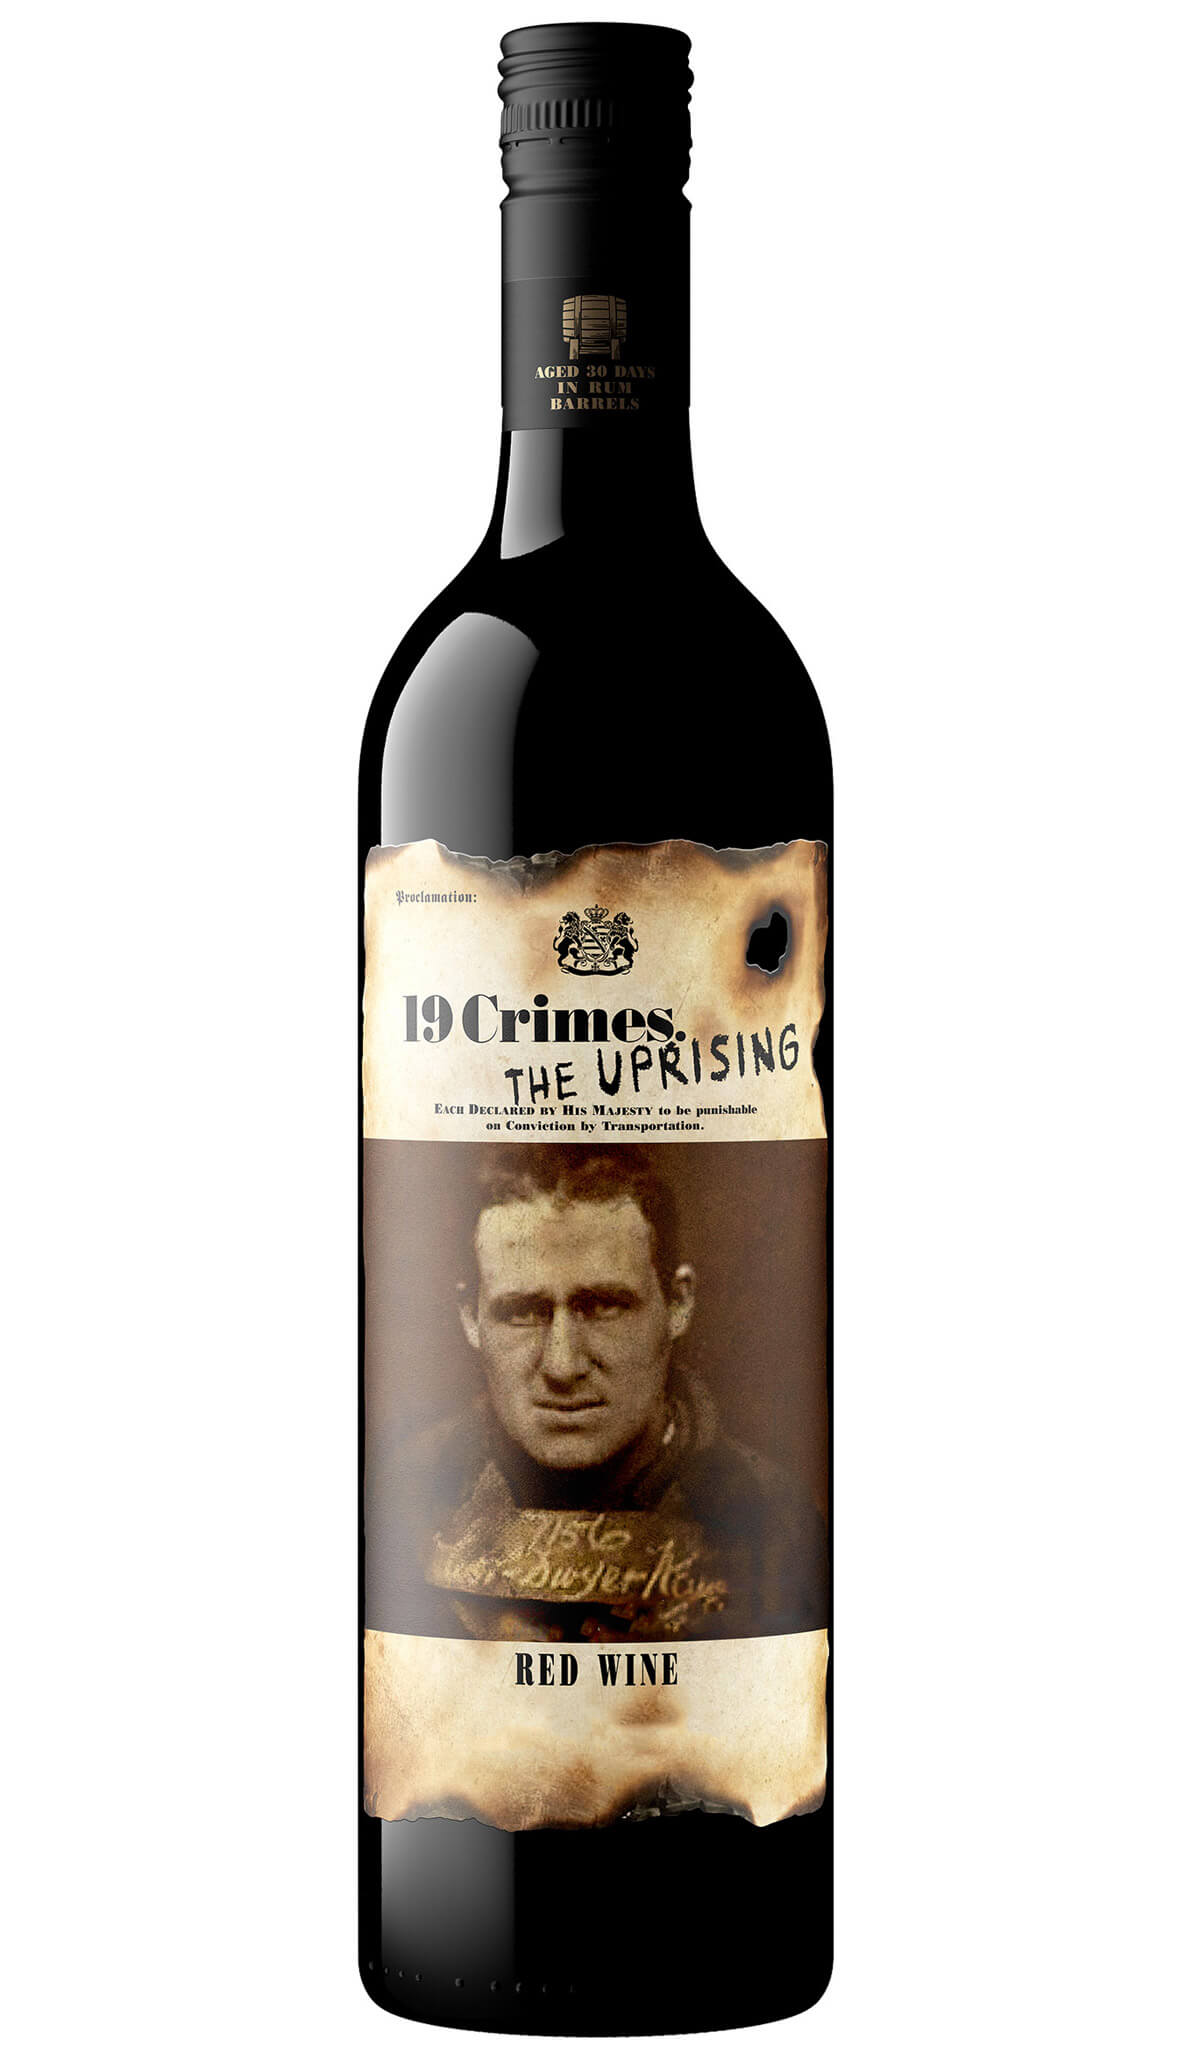 Find out more or purchase 19 Crimes Uprising Red NV online at Wine Sellers Direct - Australia's independent liquor specialists.